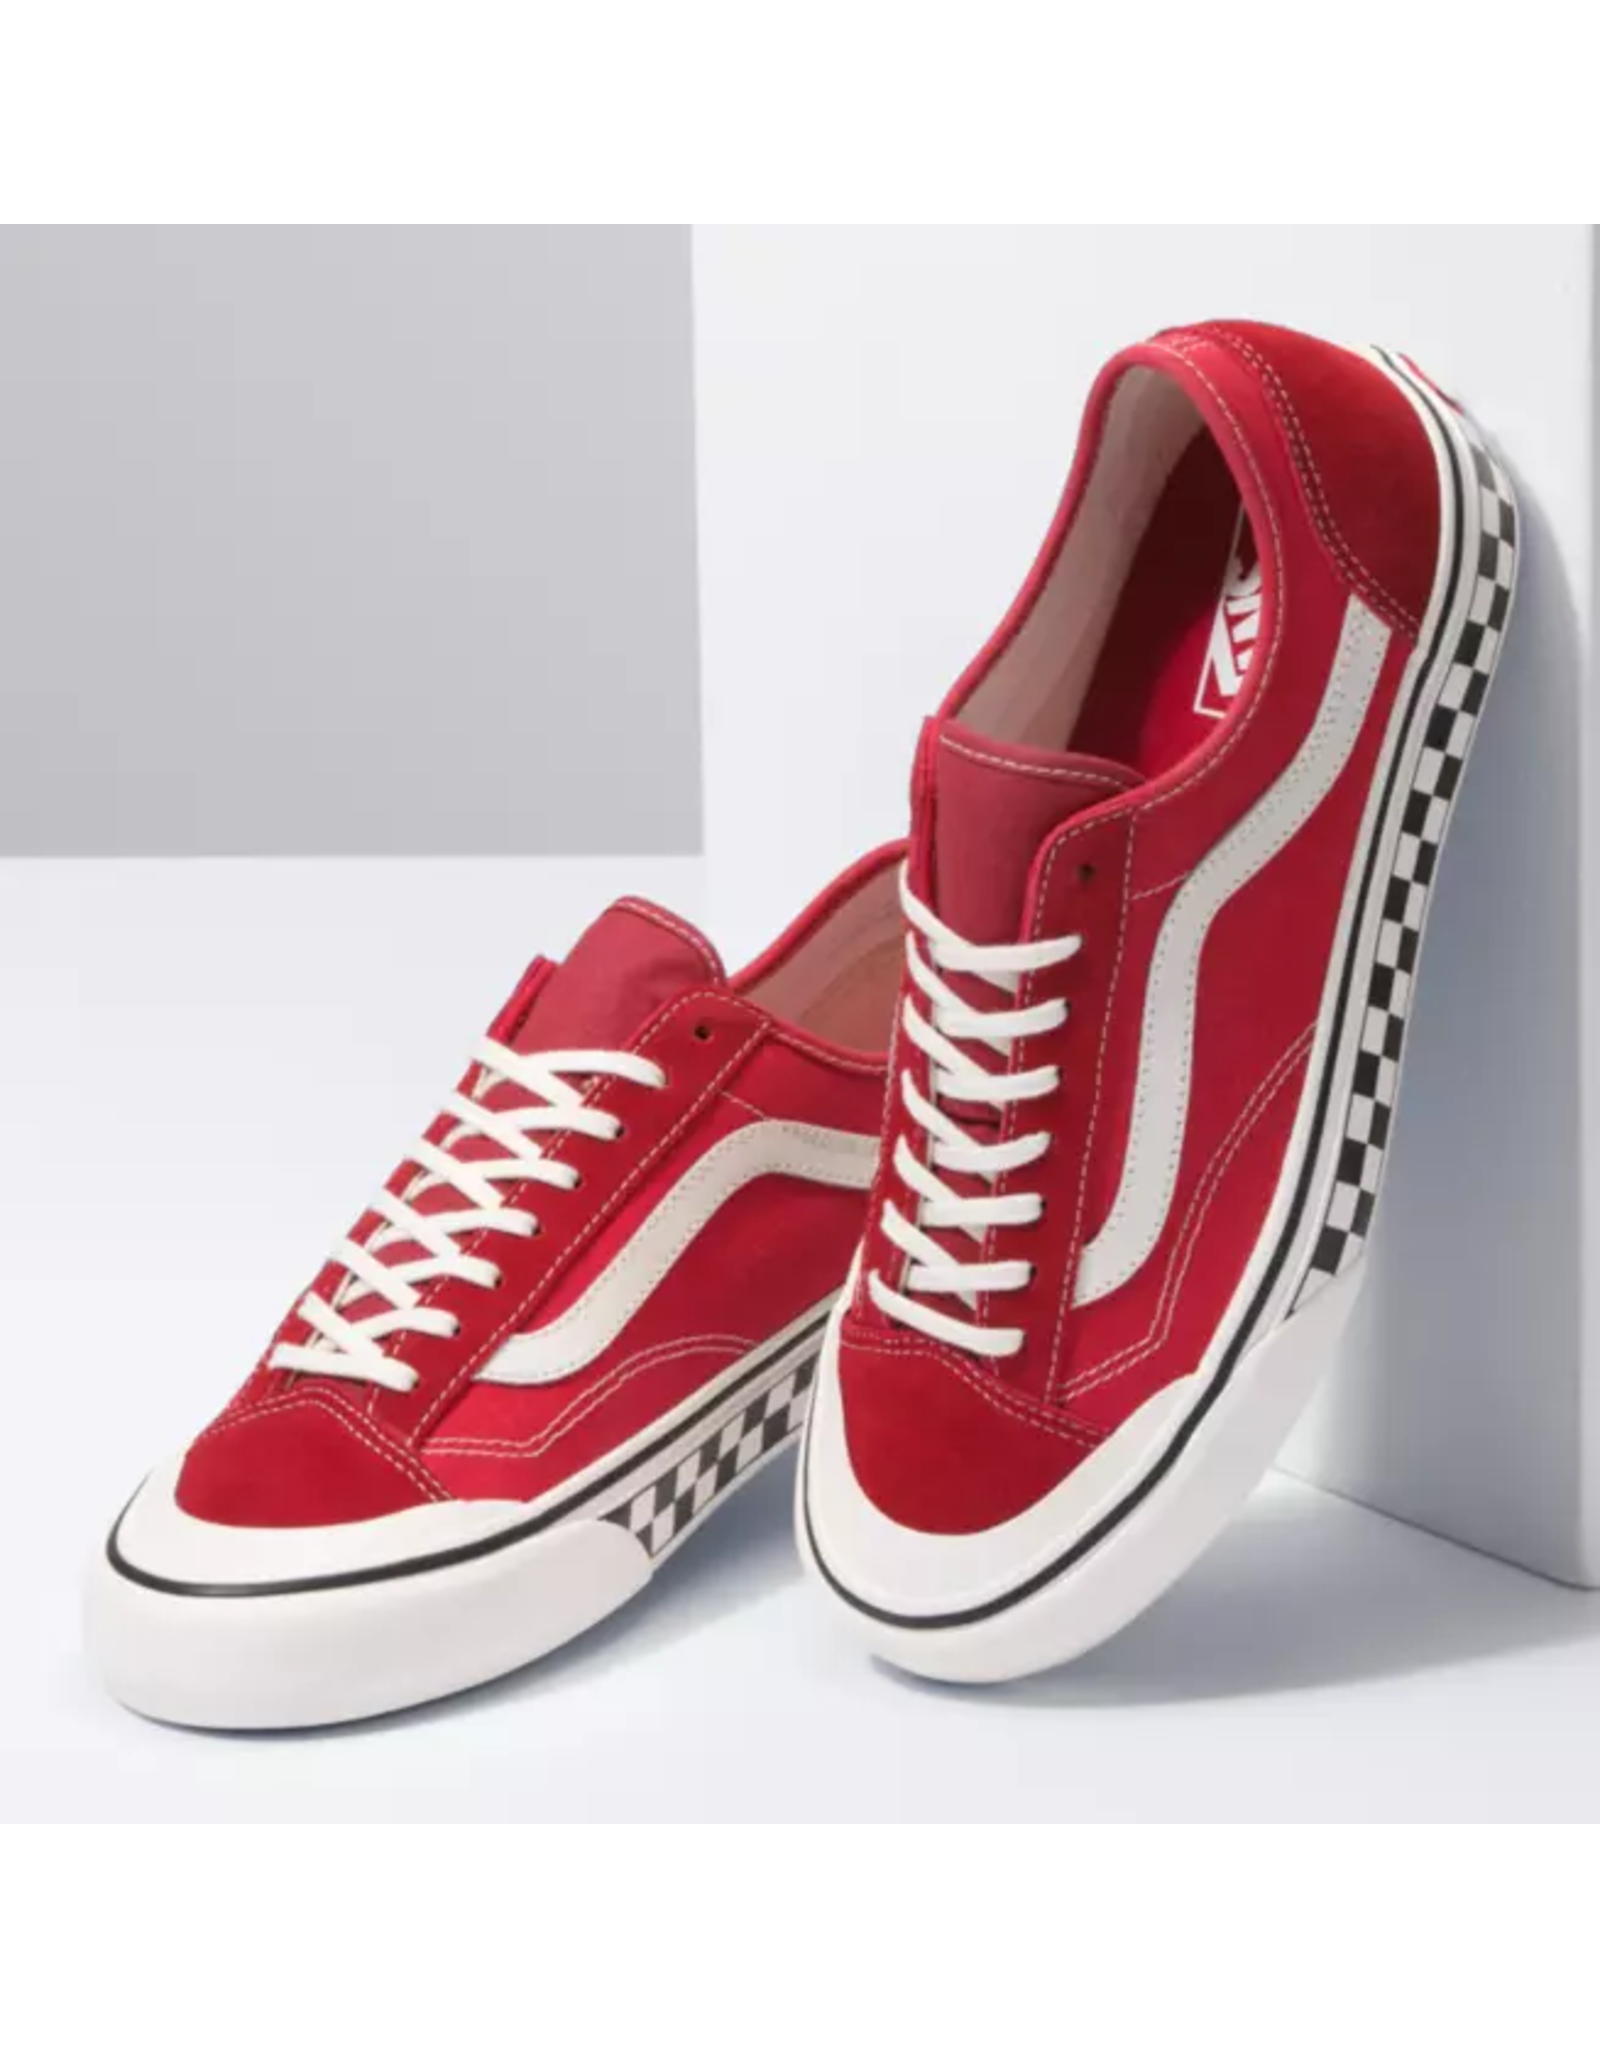 vans exclusive red style 36 decon sf sneakers